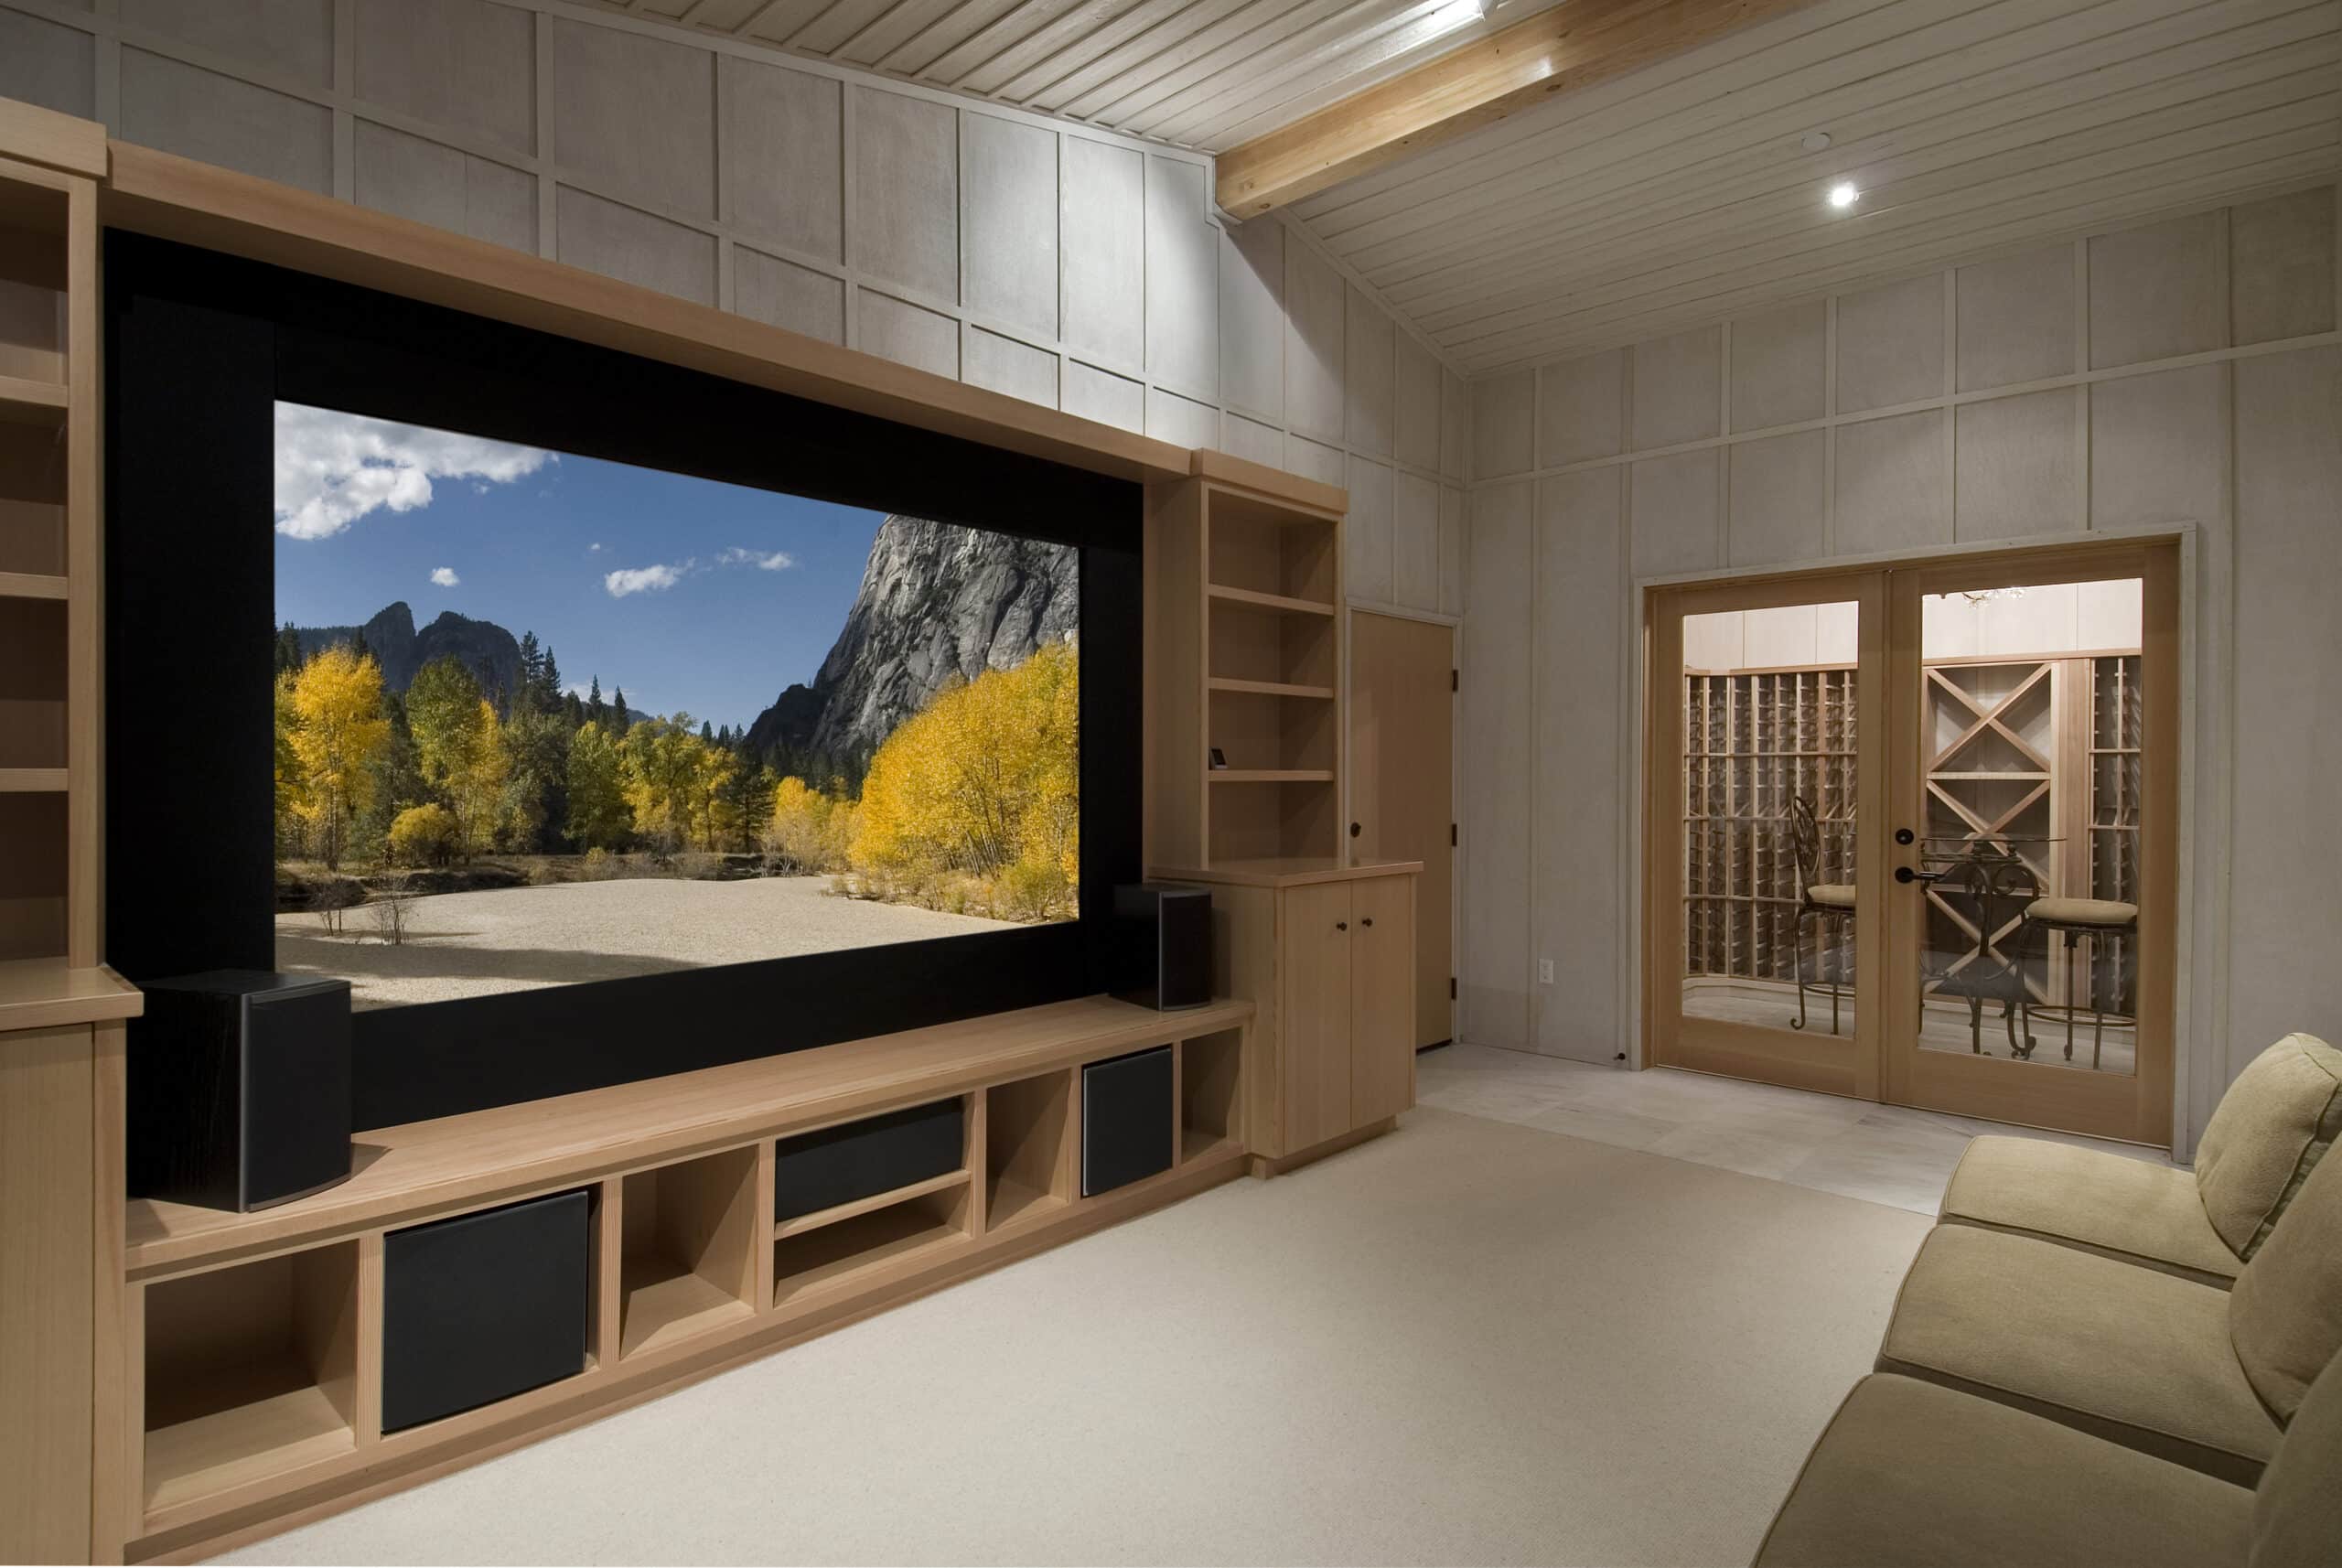 Style and Functionality with Entertainment Units